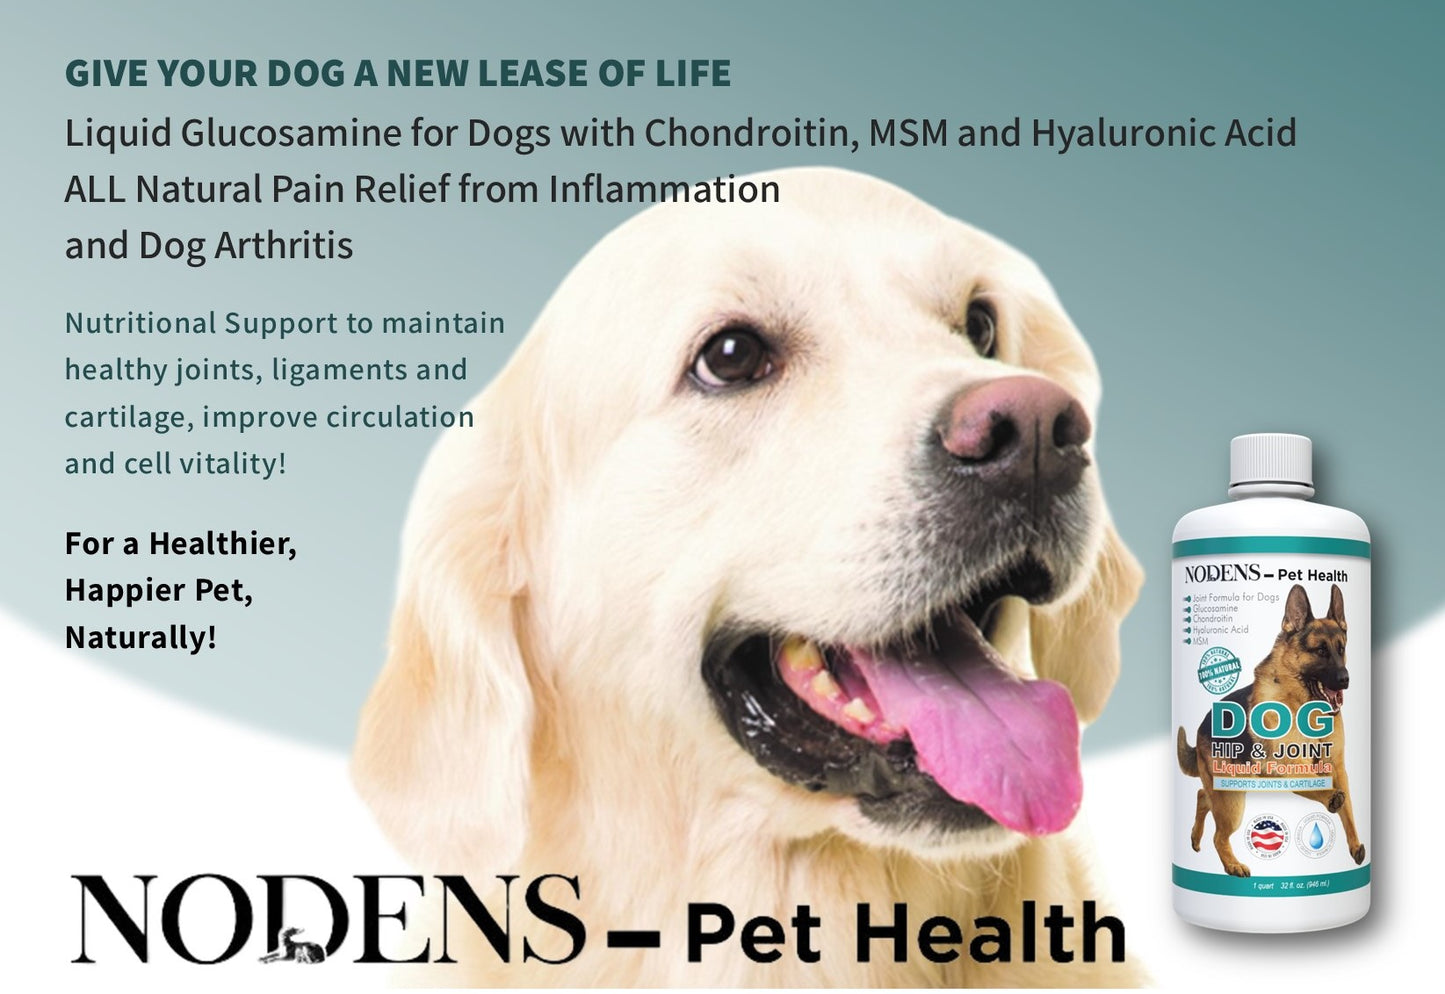 NODENS Dog Hip and Joint - Glucosamine for Dogs - Concentrated Liquid Formula - Glucosamine with Chondroitin, MSM and Hyaluronic Acid for Joint Flexibility and Pain Relief from Hip Dysplasia and Dog Arthritis